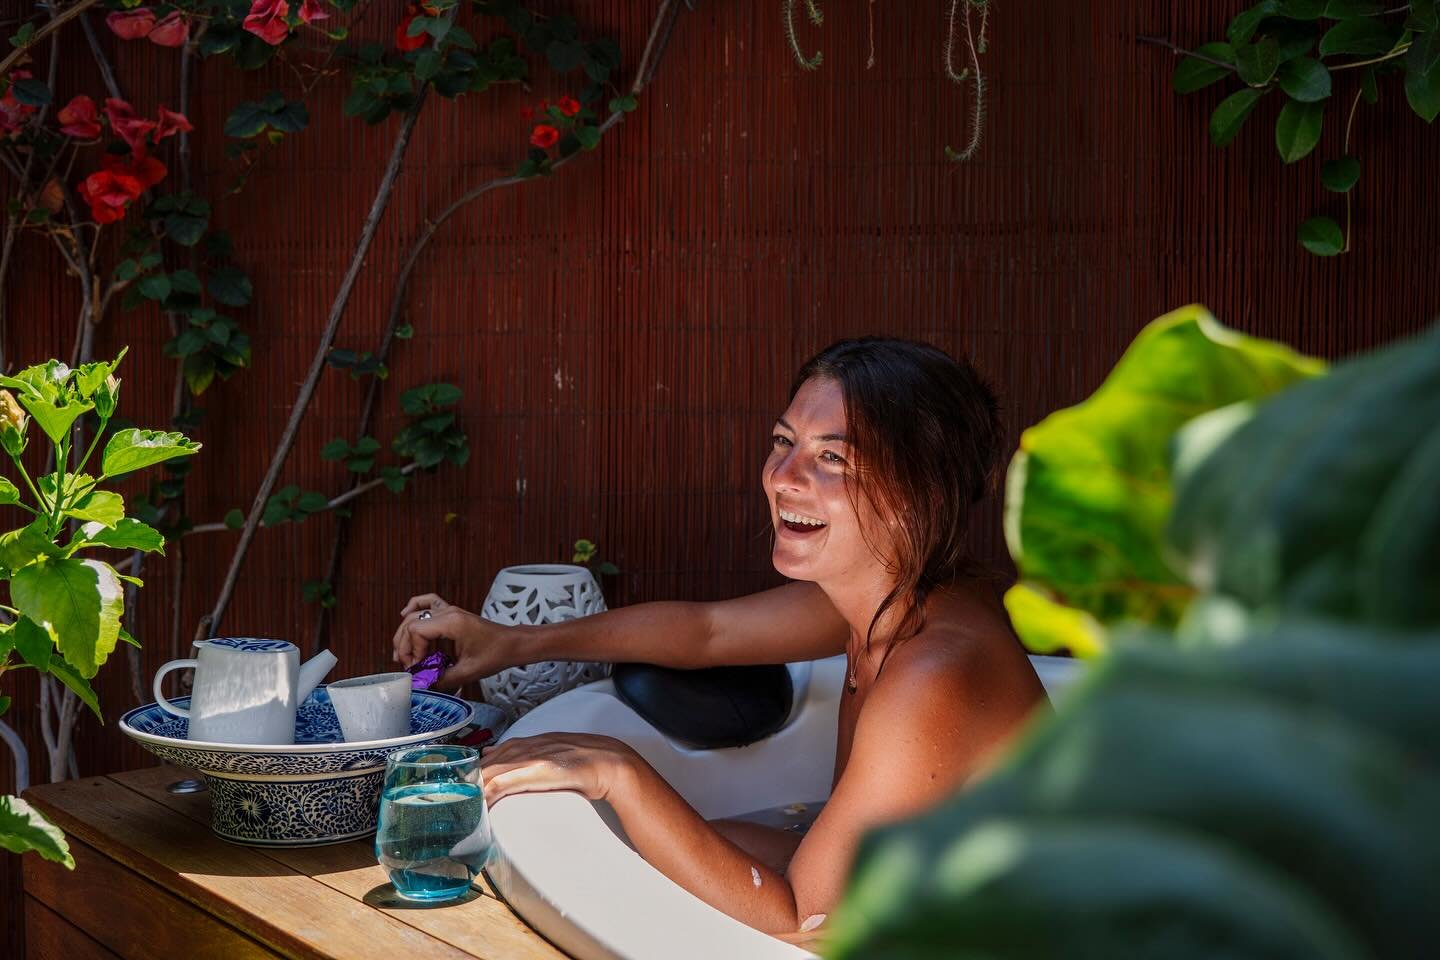 Joy🌸

Nourishing ourselves brings so much joy to our souls.

Our beautiful secret spa garden room offers a special experience of being in the garden, receiving a divine nourishing massage treatment, 
And a joyful, fresh rose petal spa bath with herb